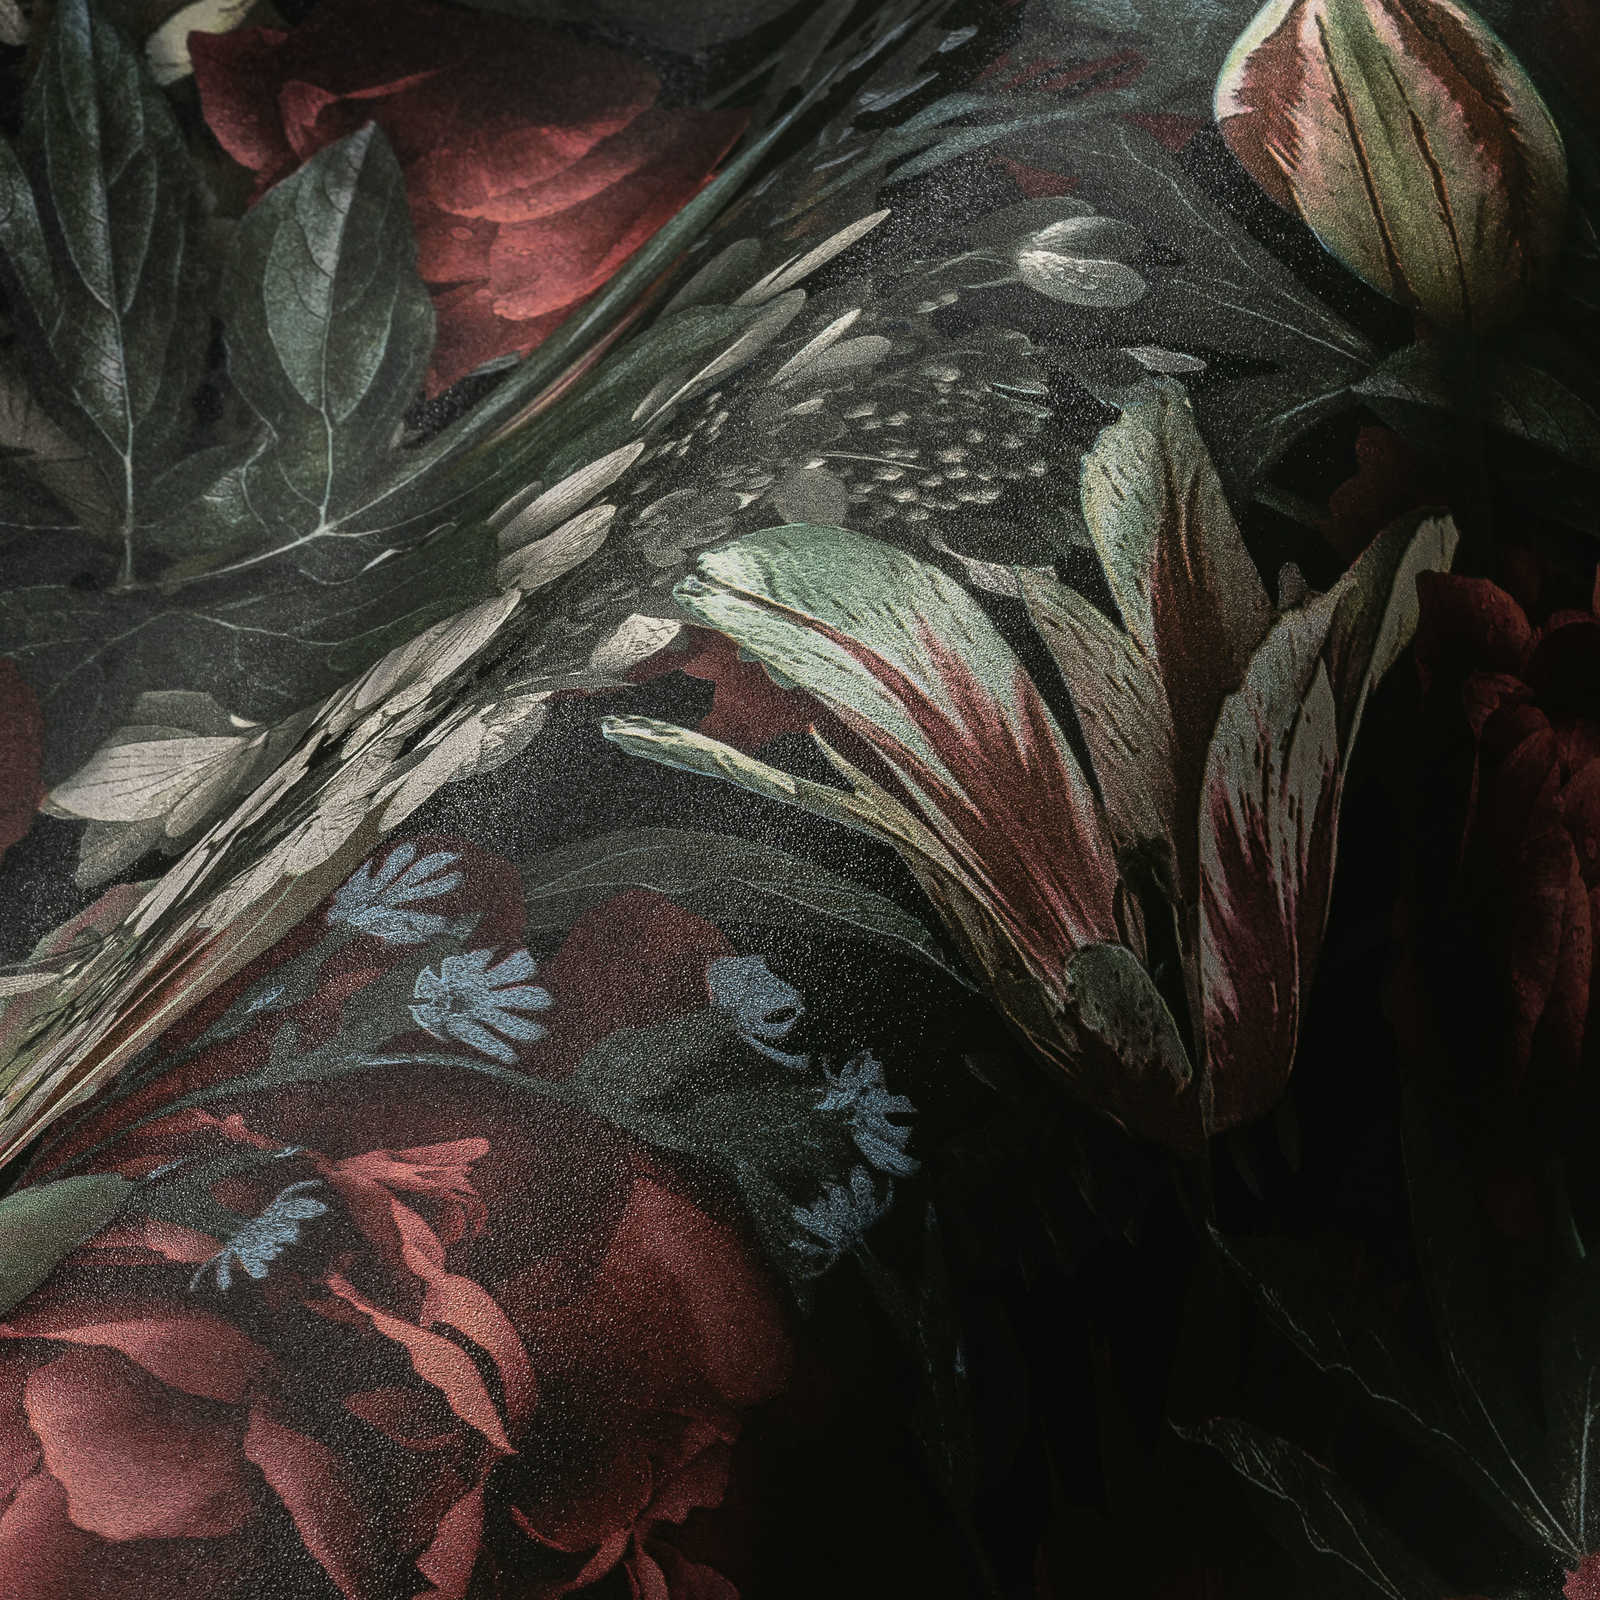             Floral wallpaper roses & tulips vintage style - green, red, cream
        